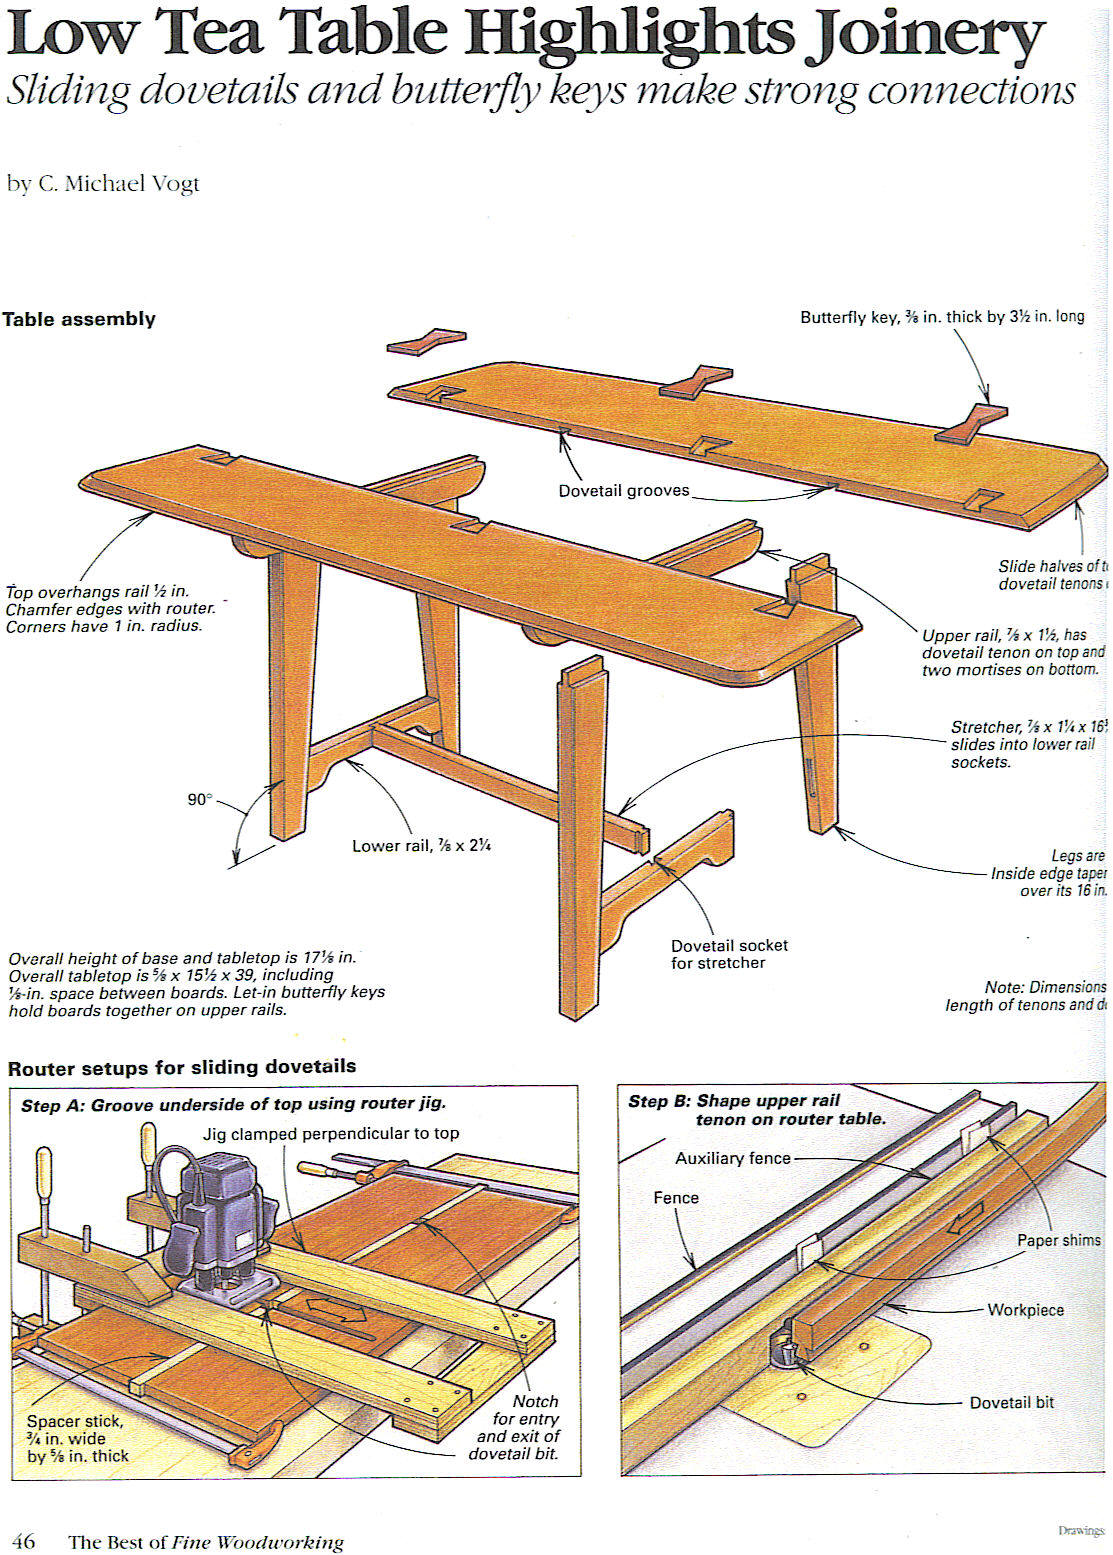 Low Tea Table Highlights Joinery